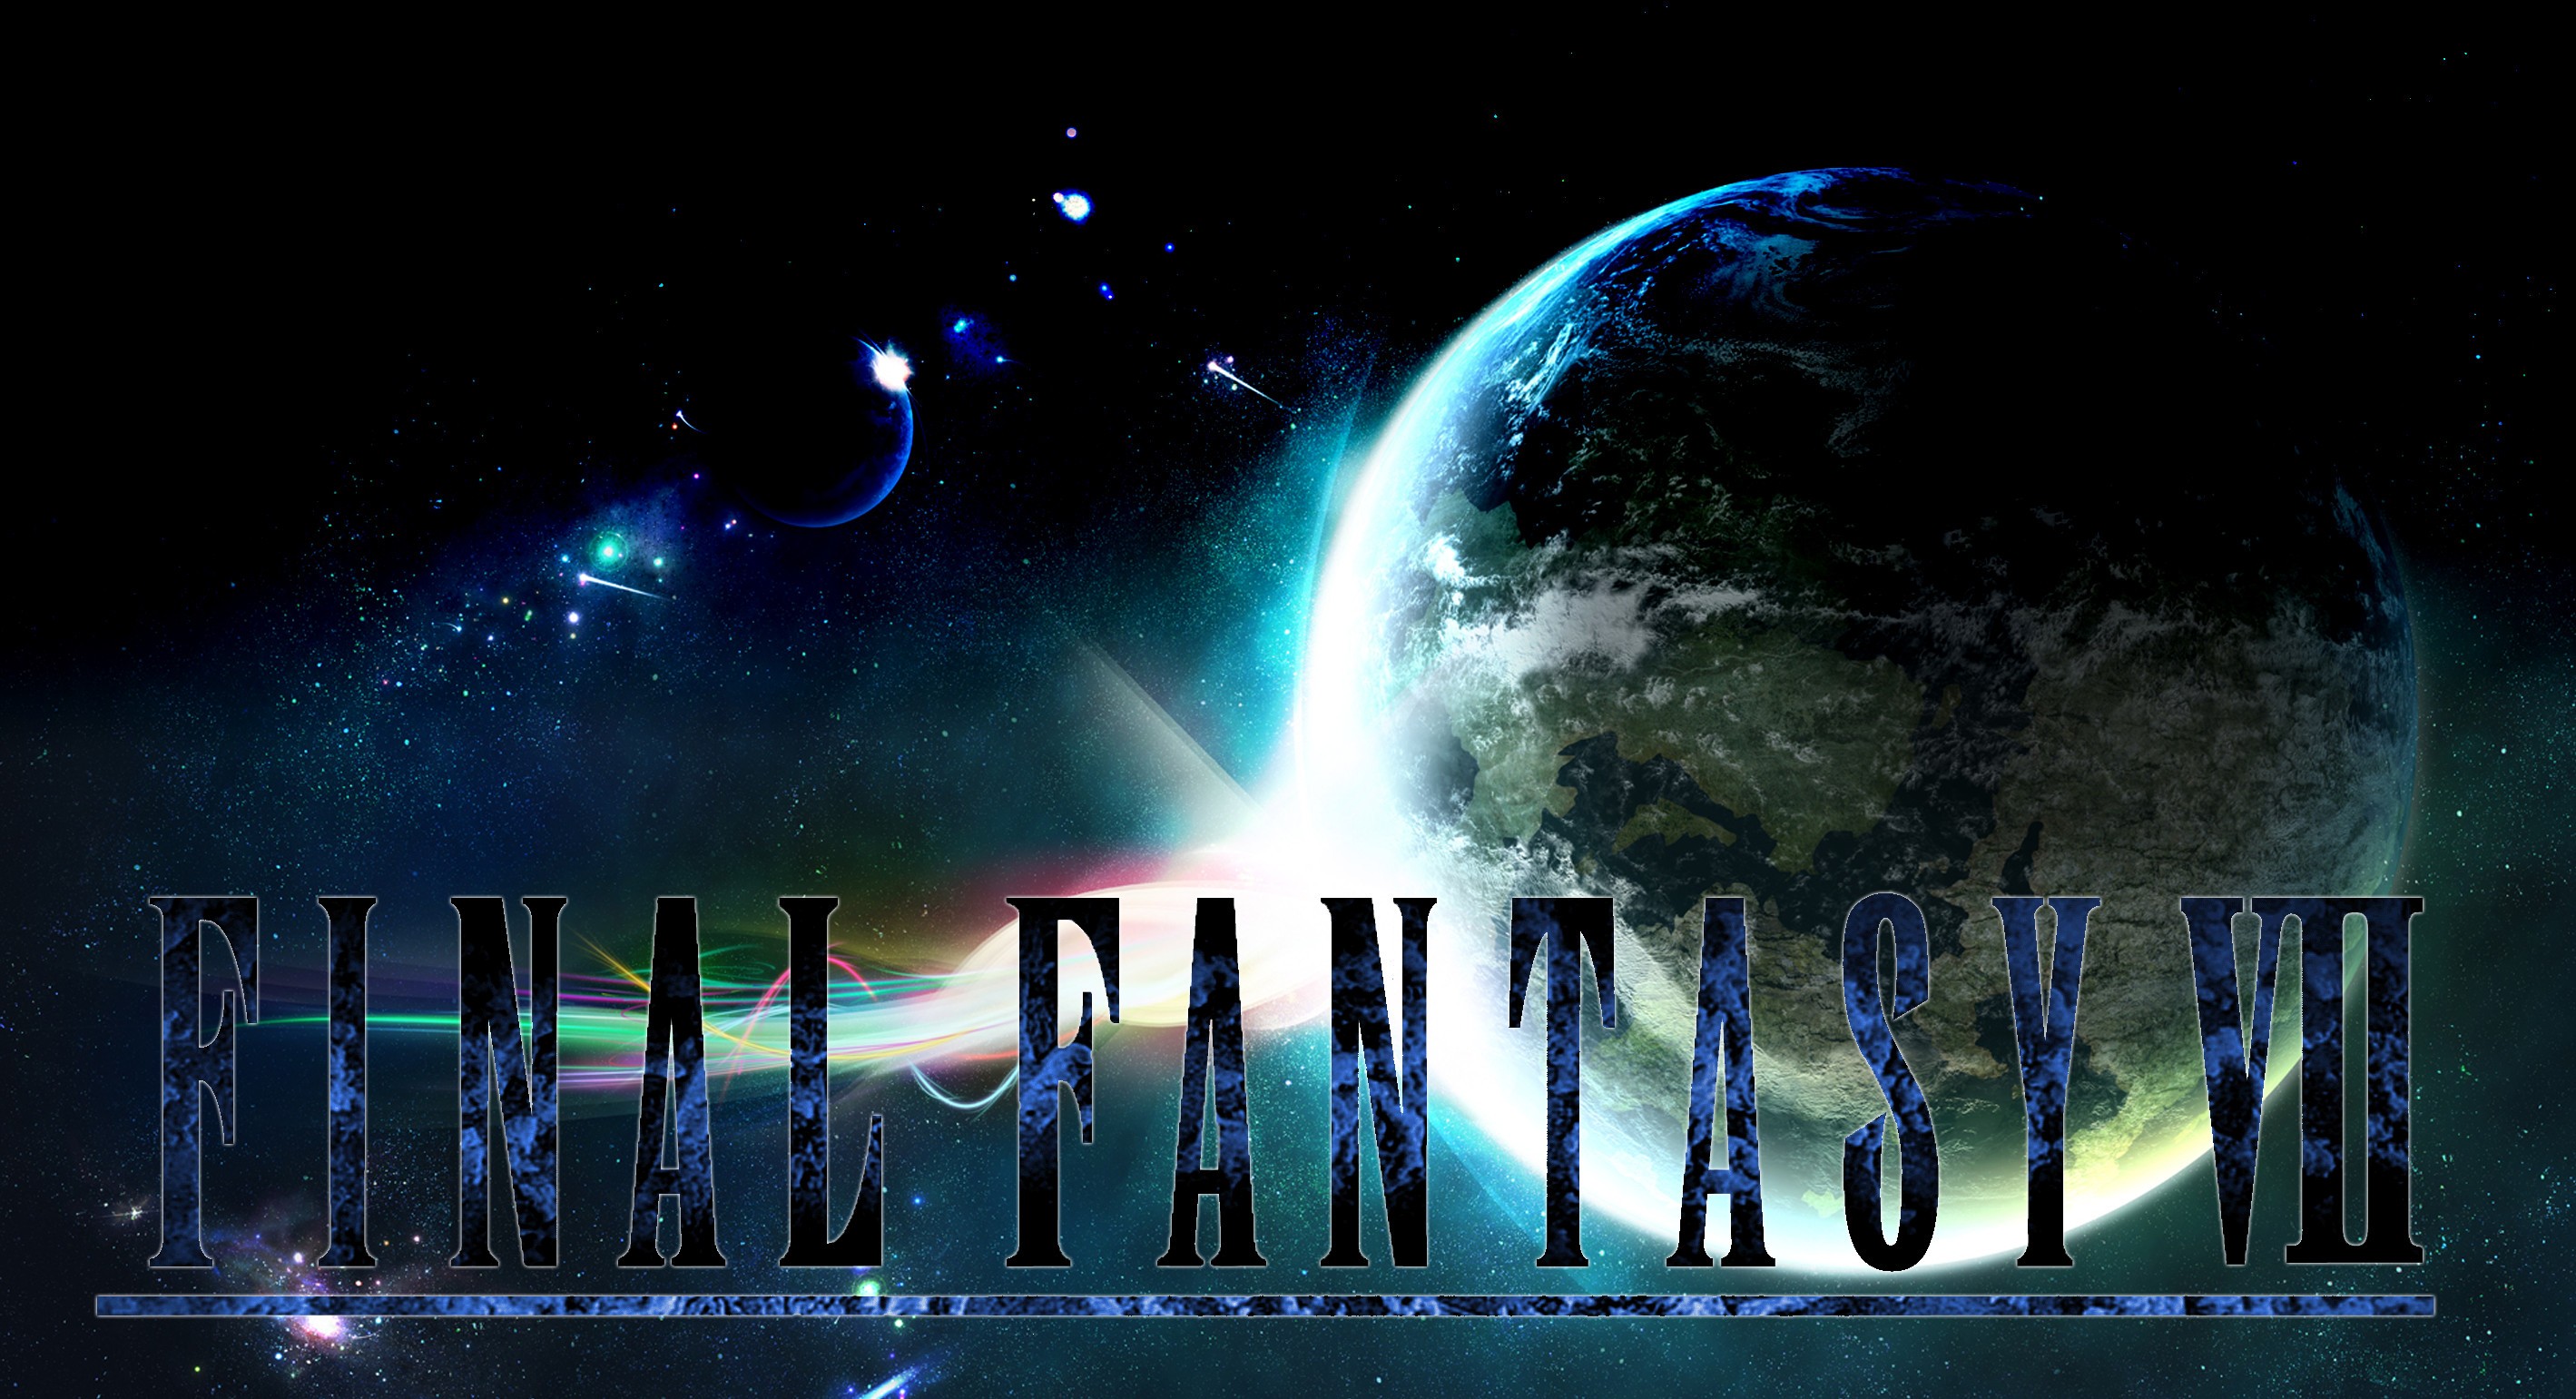 Final Fantasy VII wallpaper ·① Download free awesome full HD